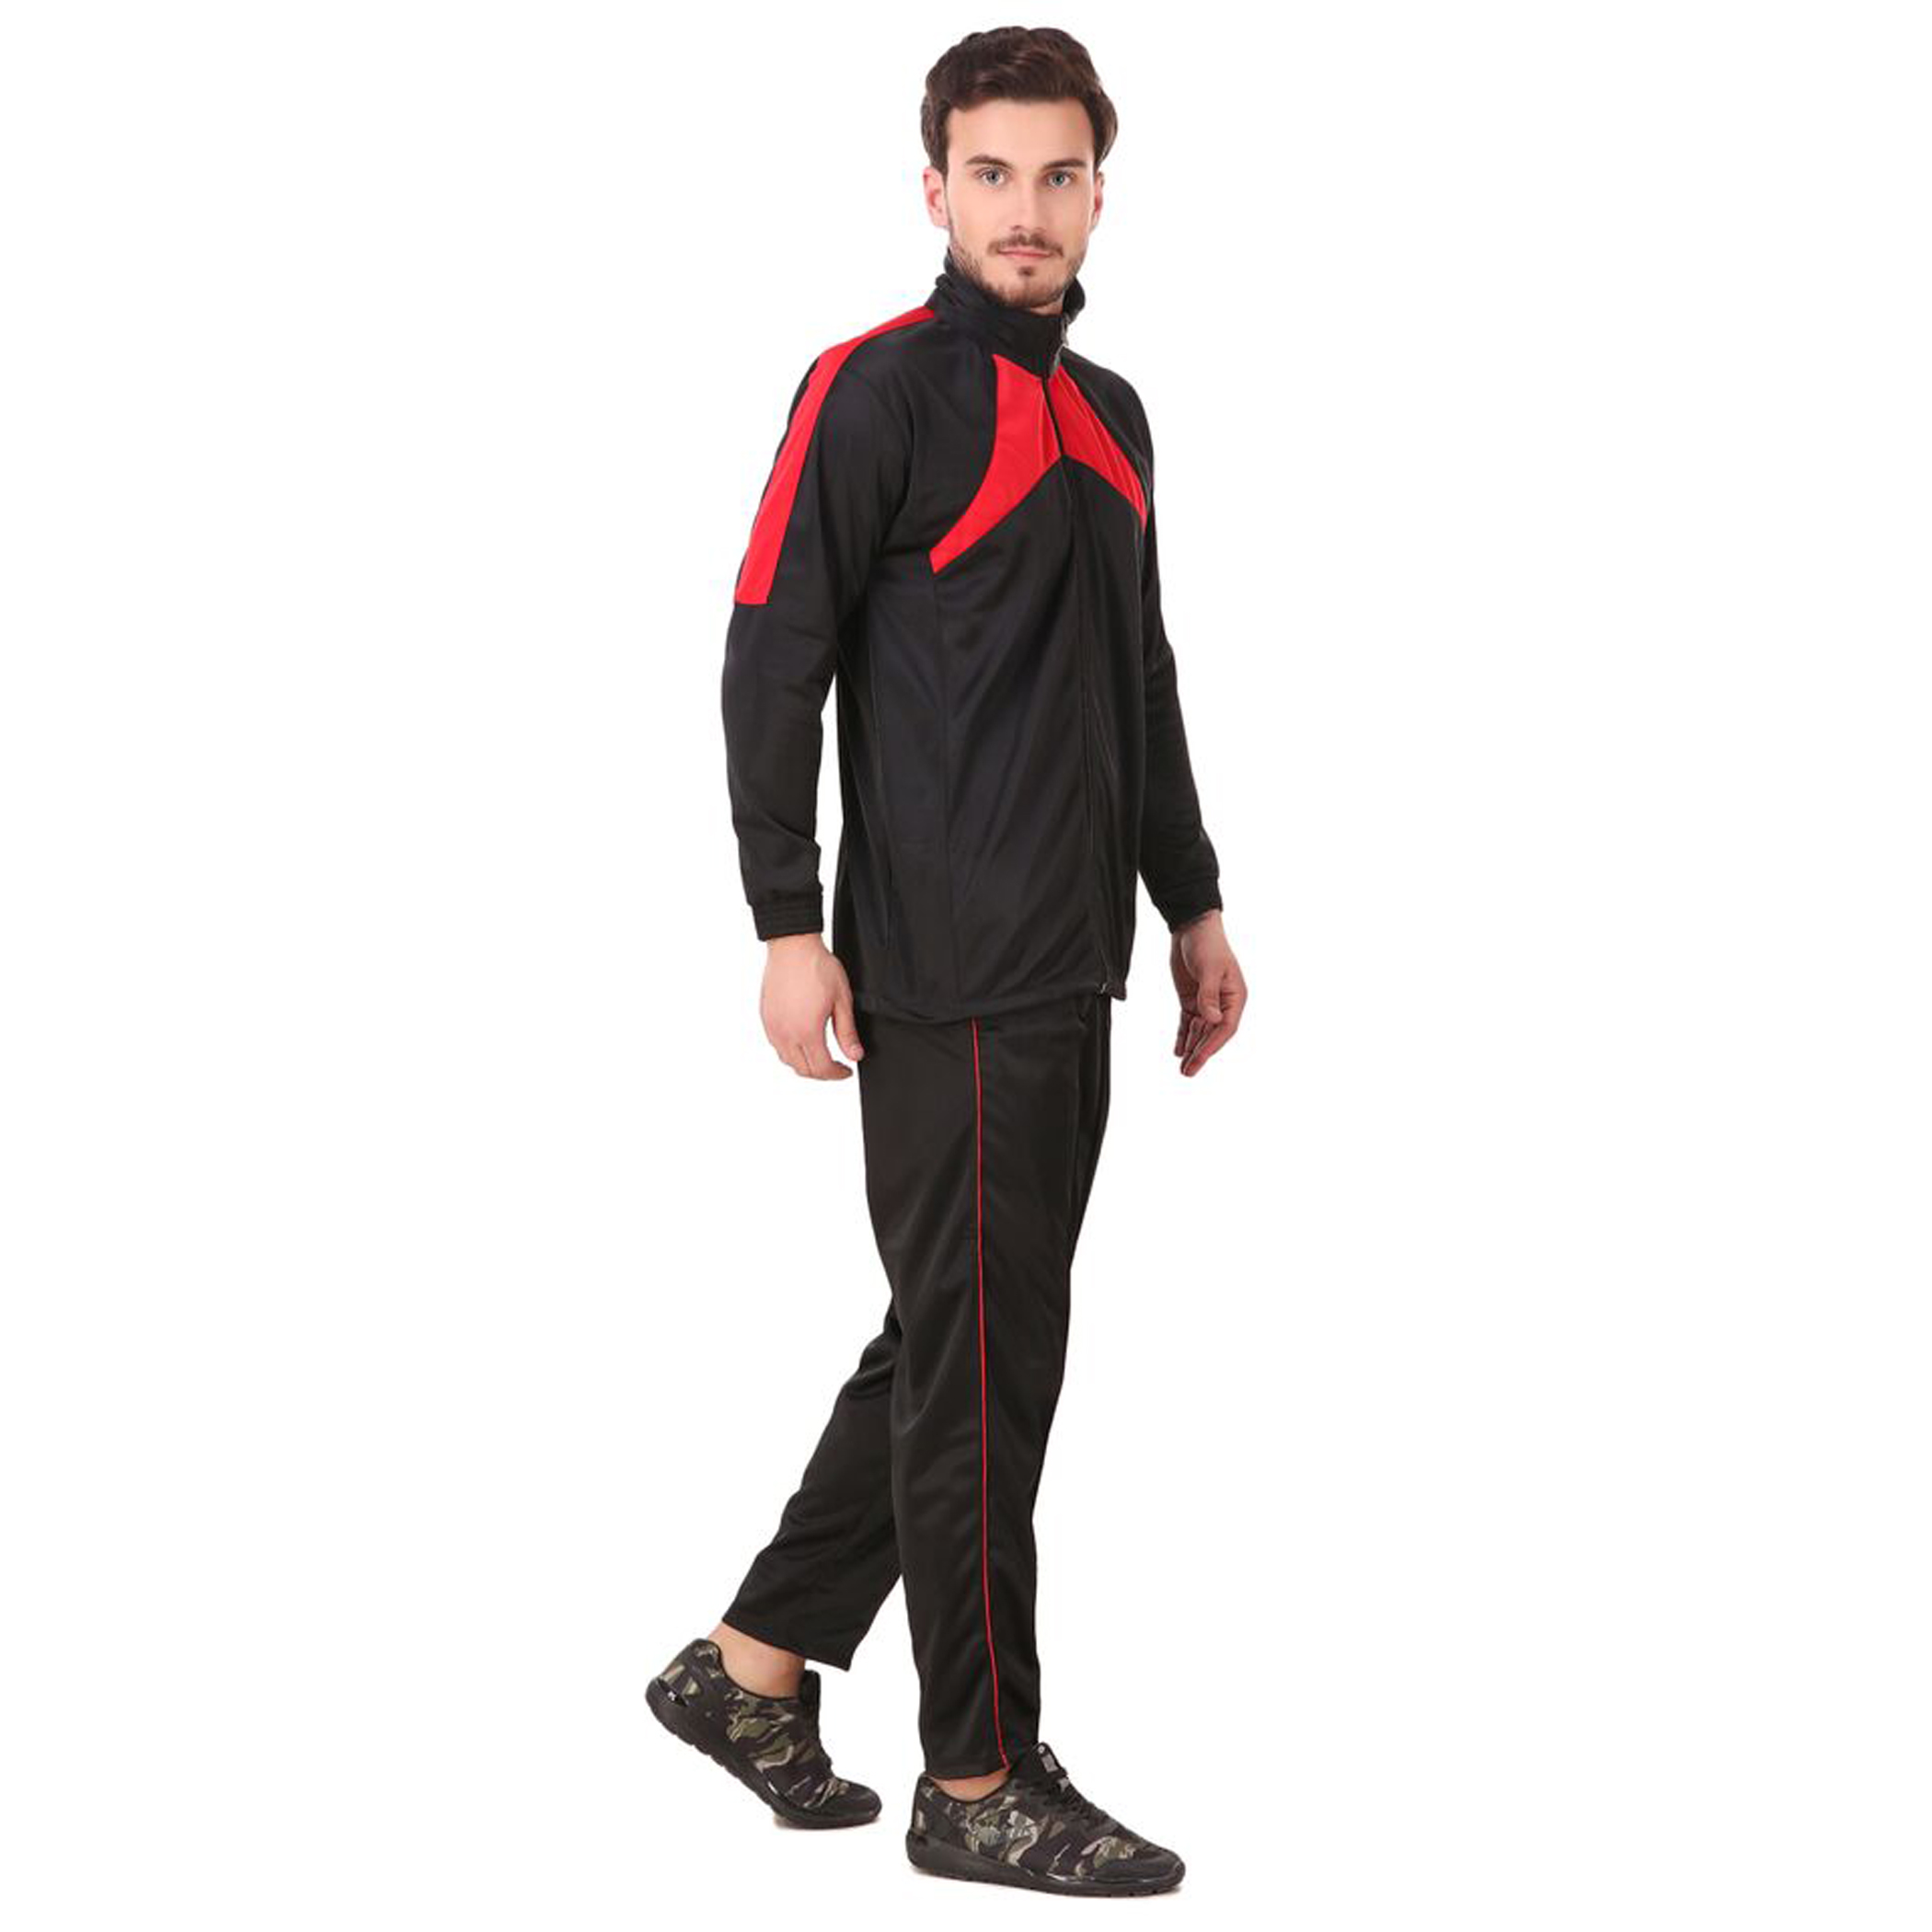 Buy Fashion7 Men's Polyester Tracksuit - Tracksuit for Men Sports ...